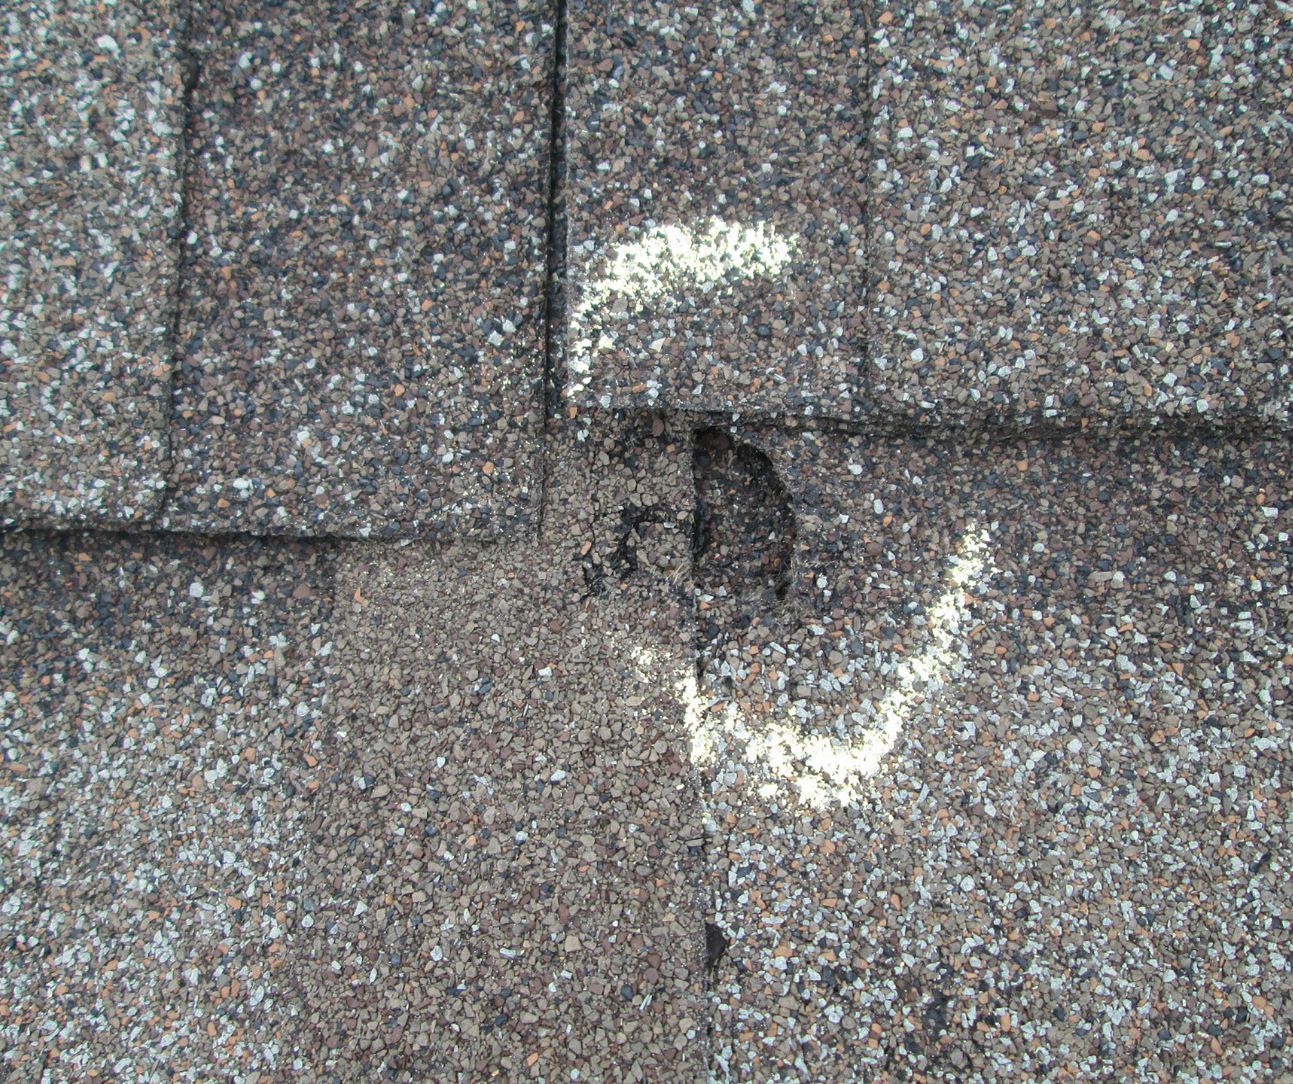 A close-up image of a shingle roof area that is damaged and circled with chalk from the professional roofing inspection.